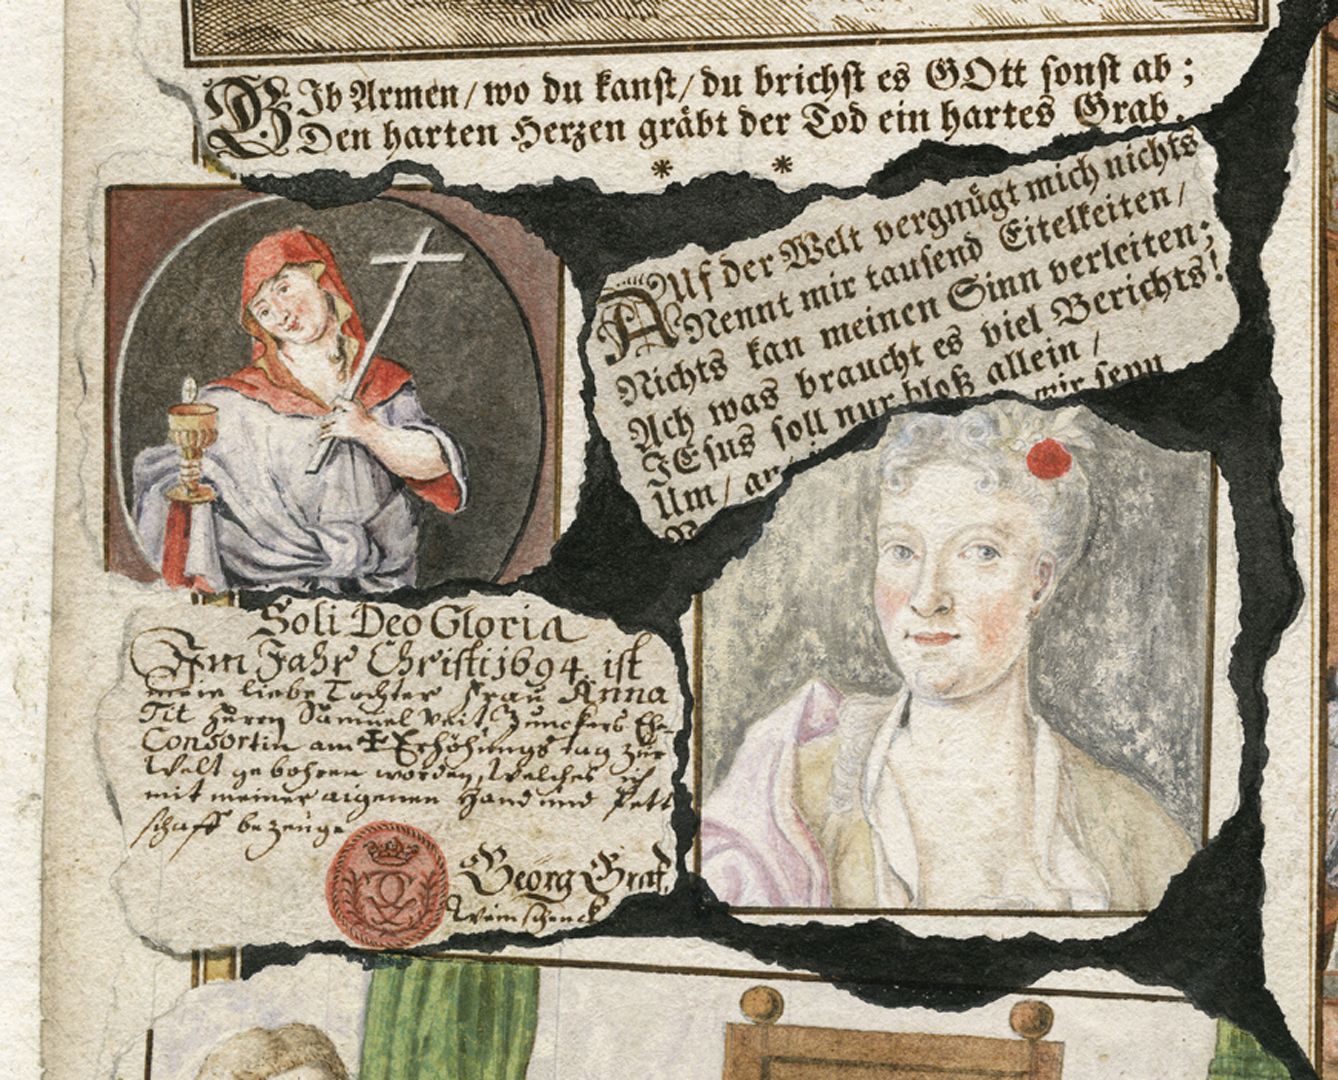 Quodlibet on the death of the wine merchant Graff Group of "quodlibet notes" at the middle left margin. On the lower left, the "birth certificate" of the daughter Anna from 1694.